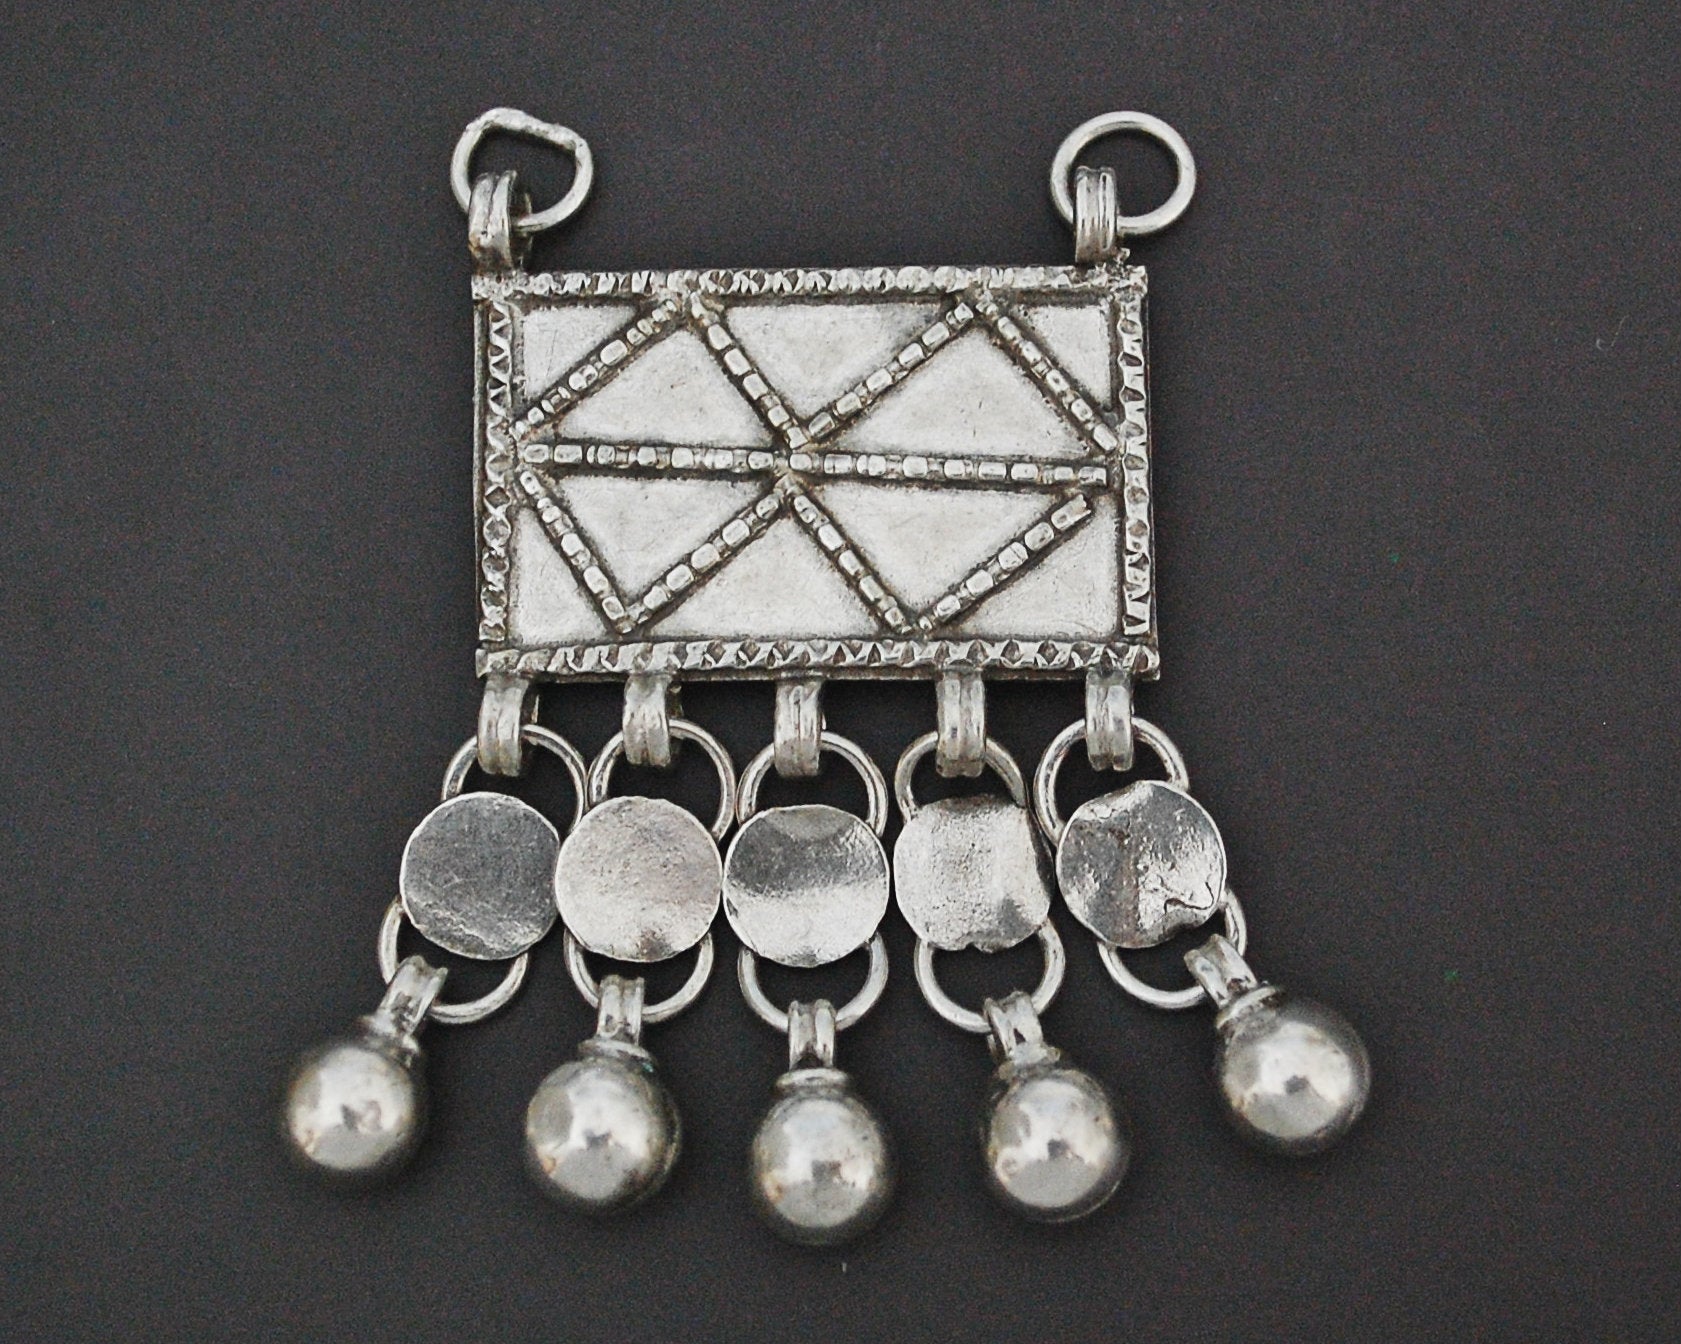 Bedouin Egyptian Zar Amulet with Bells